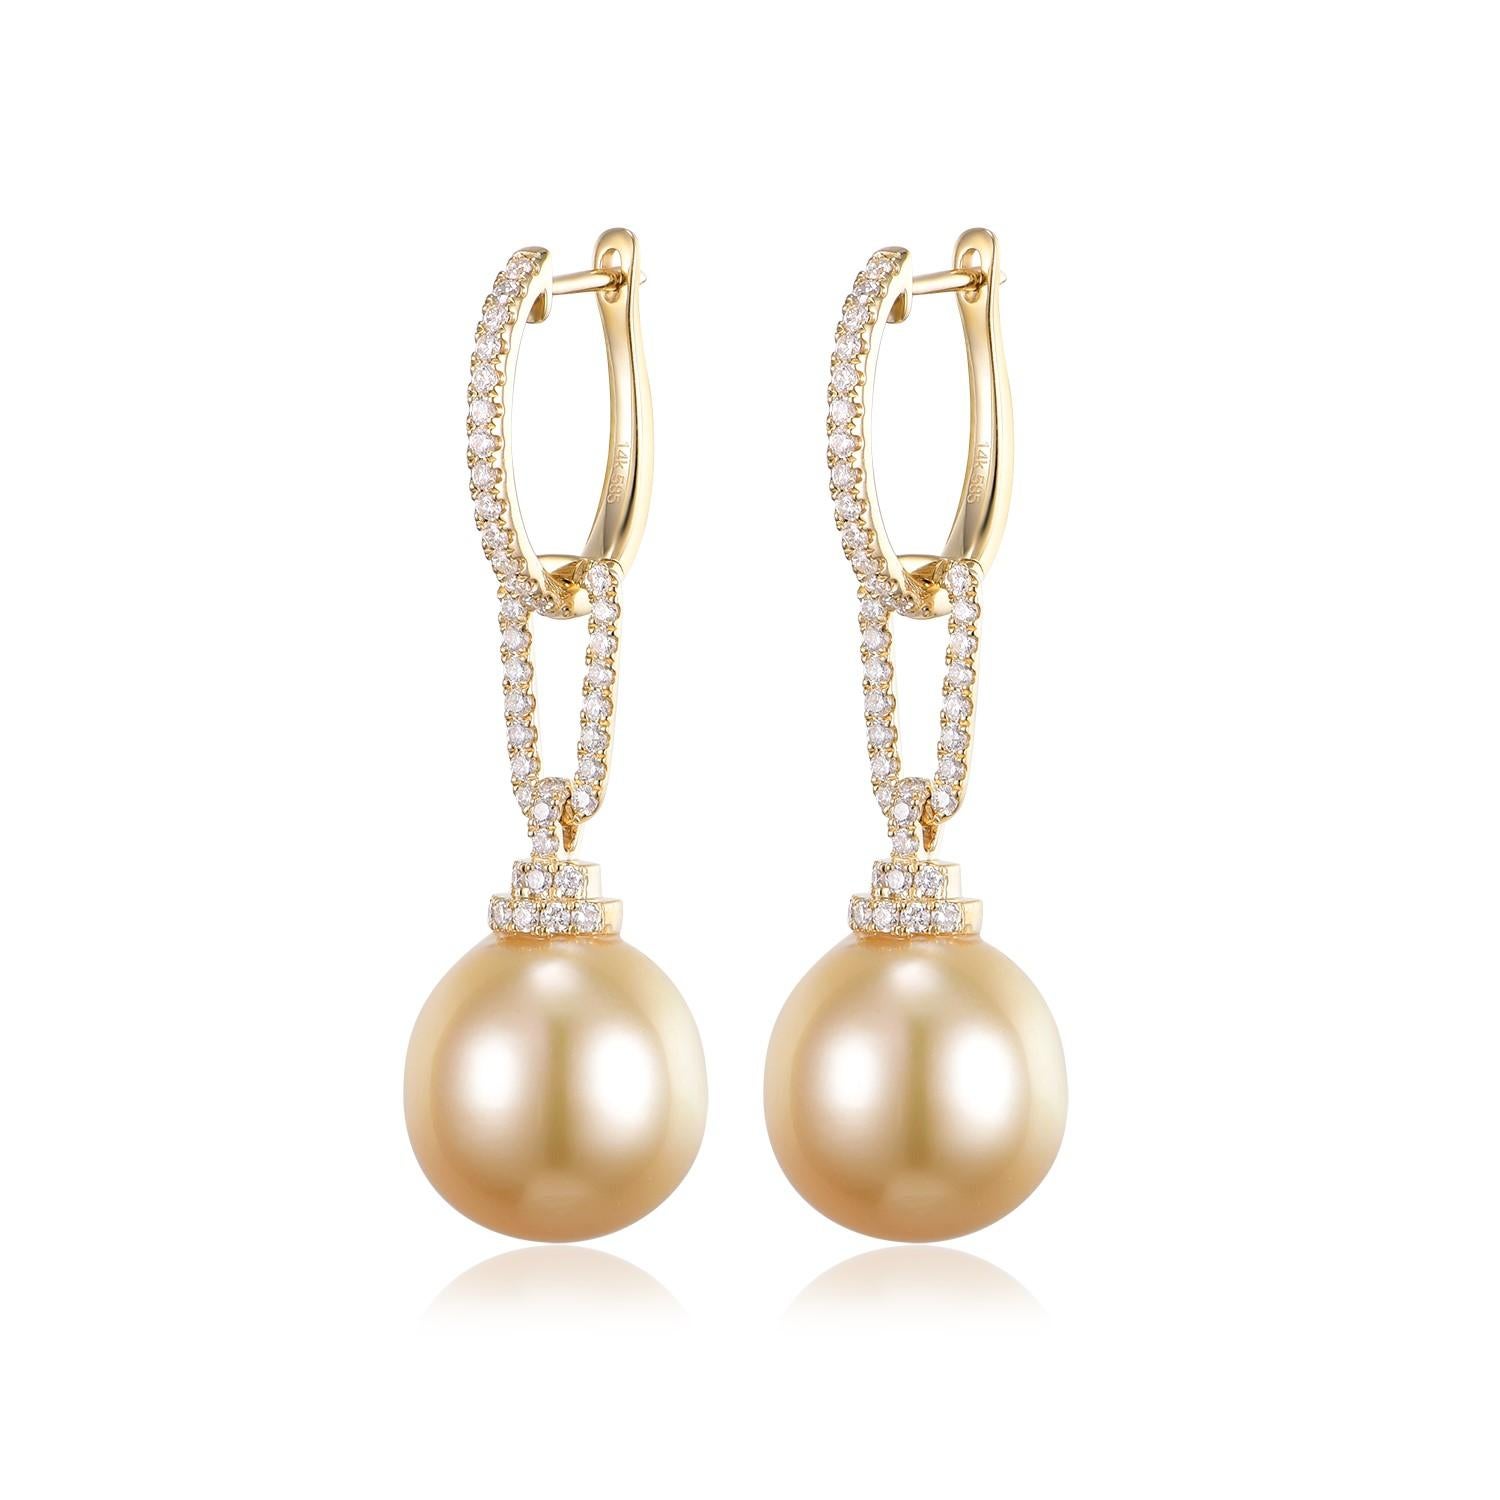 Behold the understated elegance of these 14K yellow gold earrings, each featuring a South Sea pearl with a natural, gentle form. Measuring approximately 12.5 x 15mm, the pearls are not perfectly round, a characteristic that enhances their unique